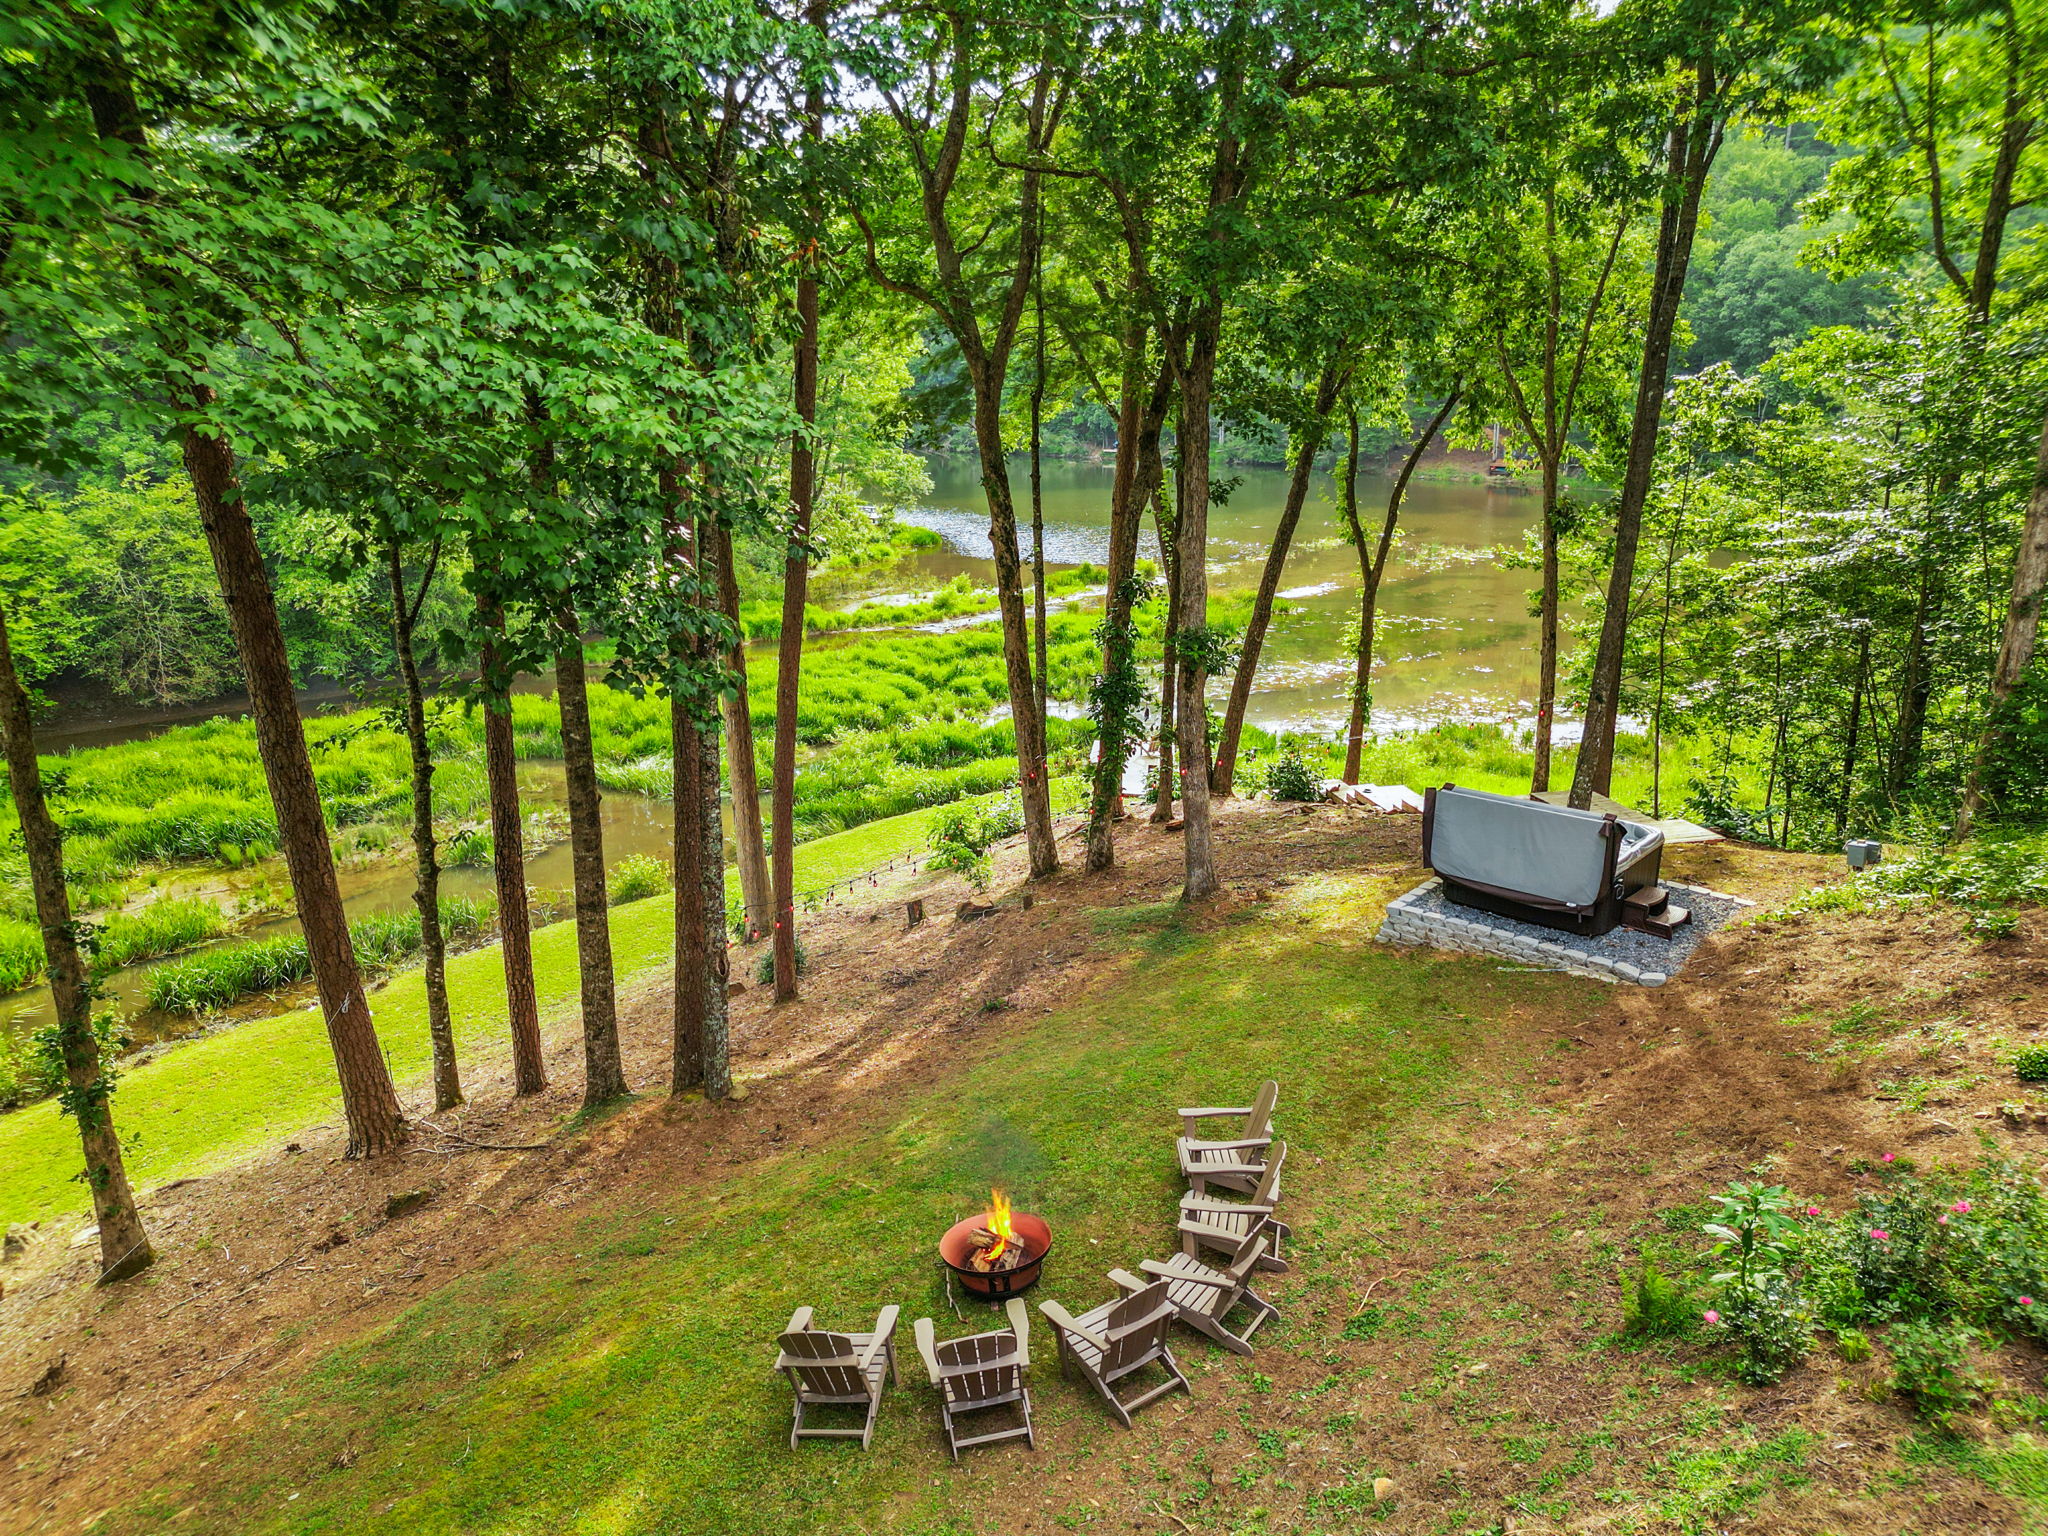 Firepit and Hot Tub, and a private waterfront. Take our paddleboards out and enjoy the serenity here in Cherry Log.